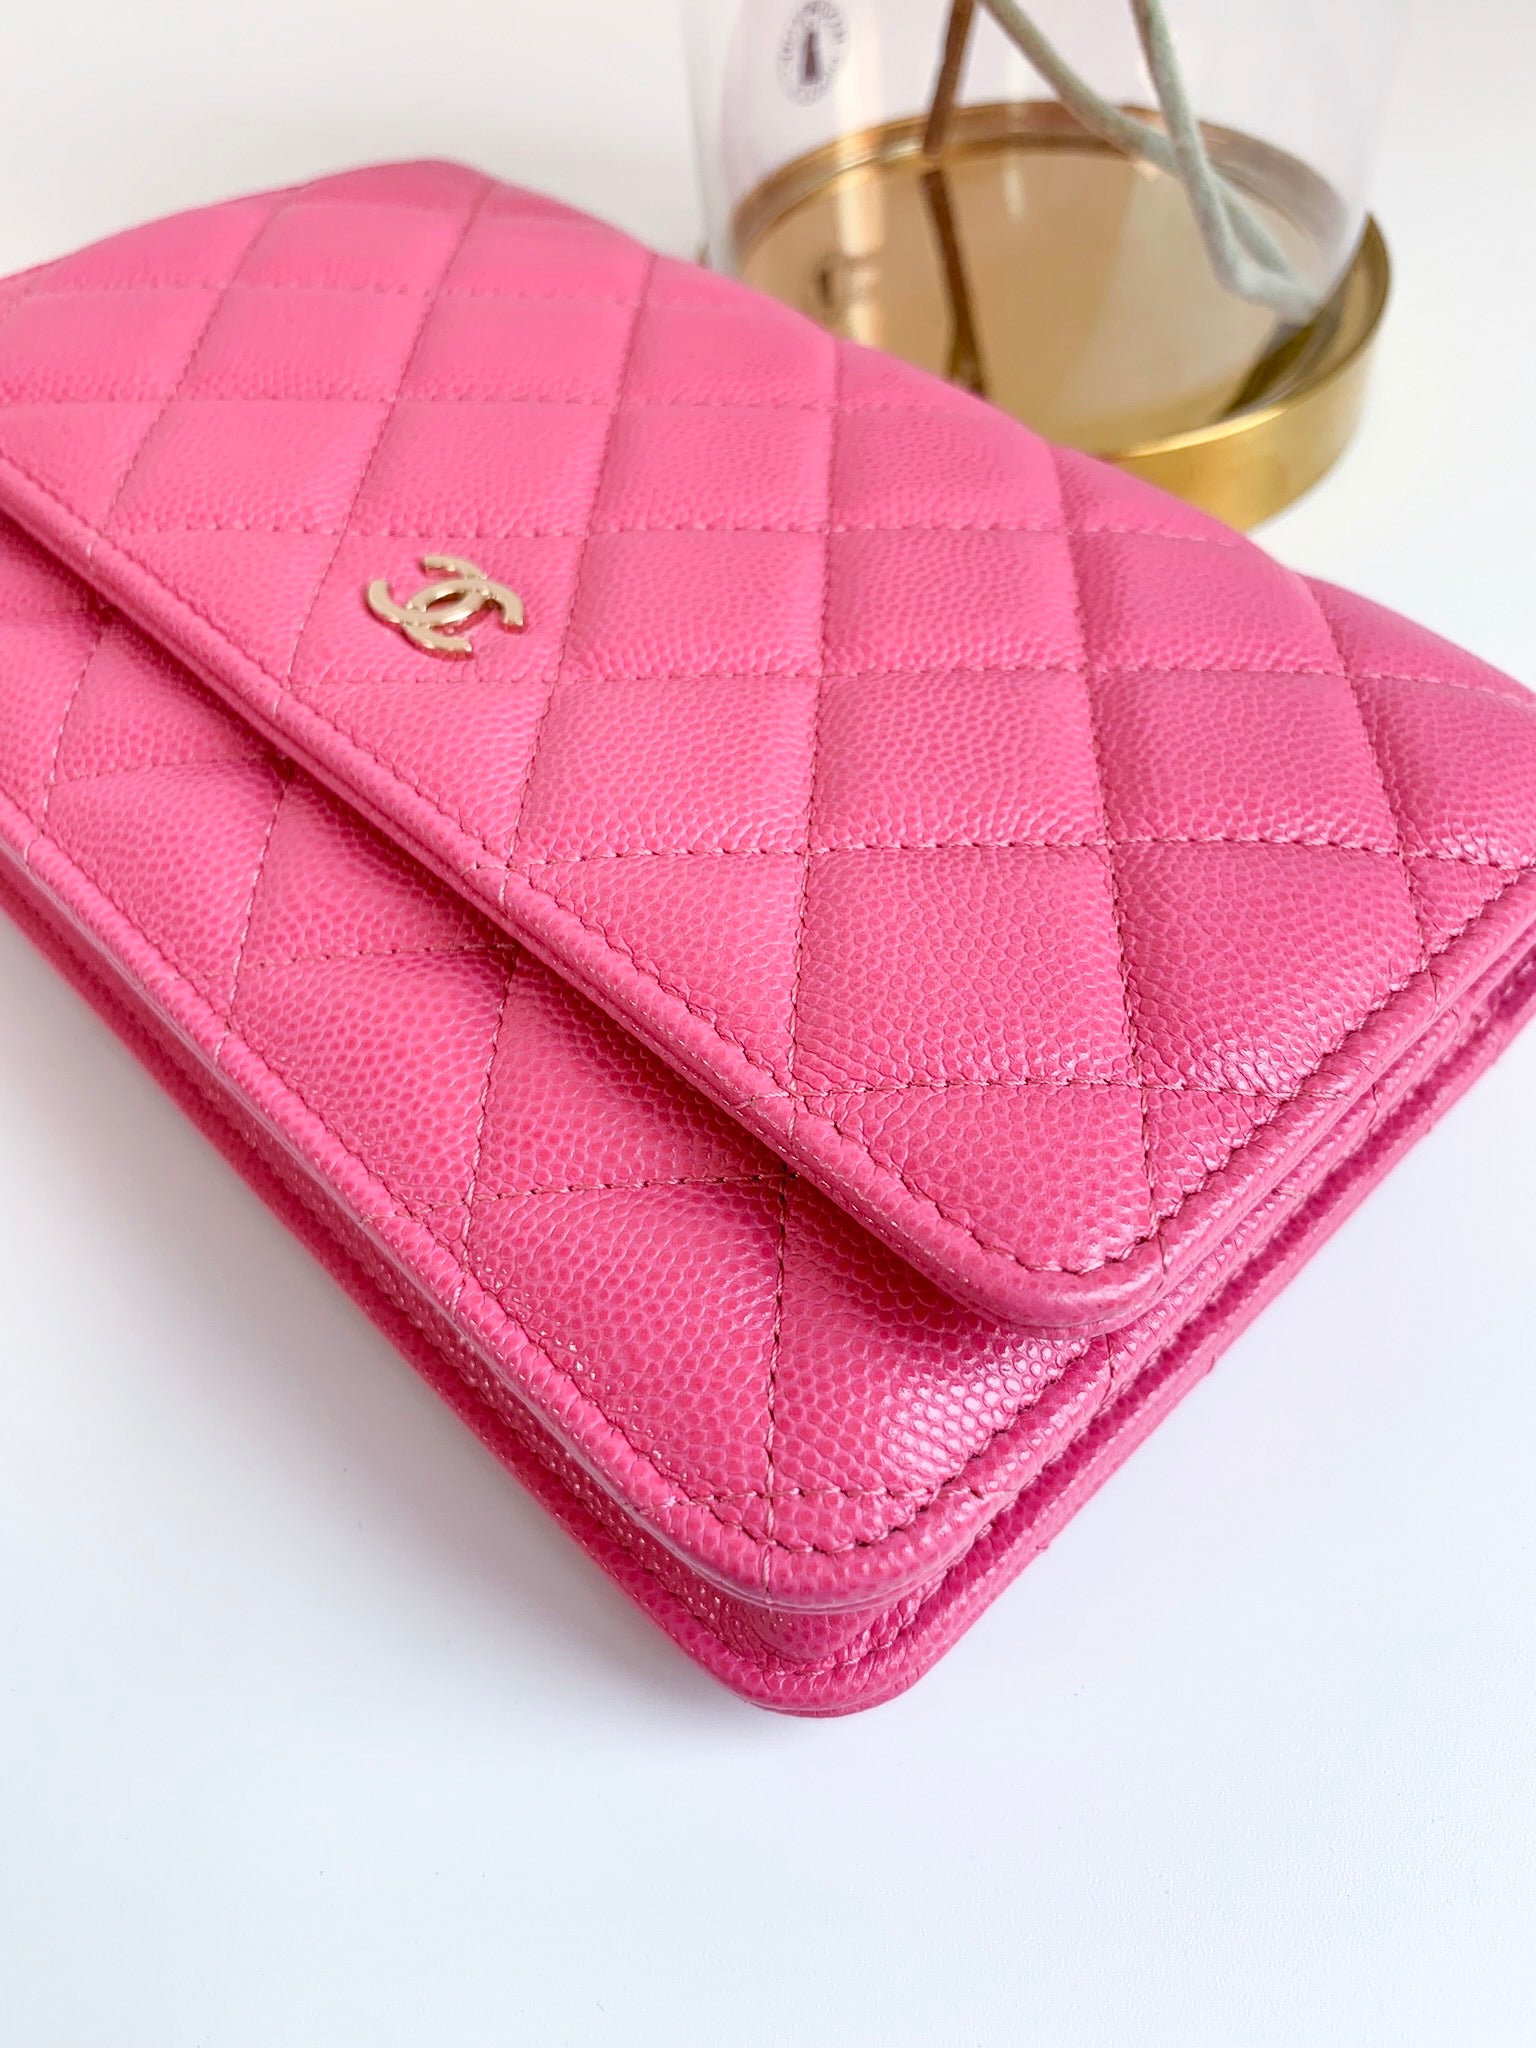 Chanel Pink Classic Quilted Lambskin Leather WOC Wallet on a Chain  Crossbody Bag AP1450 B08034 NH621 US4665 offered by Fin and Mo   ExportersSG